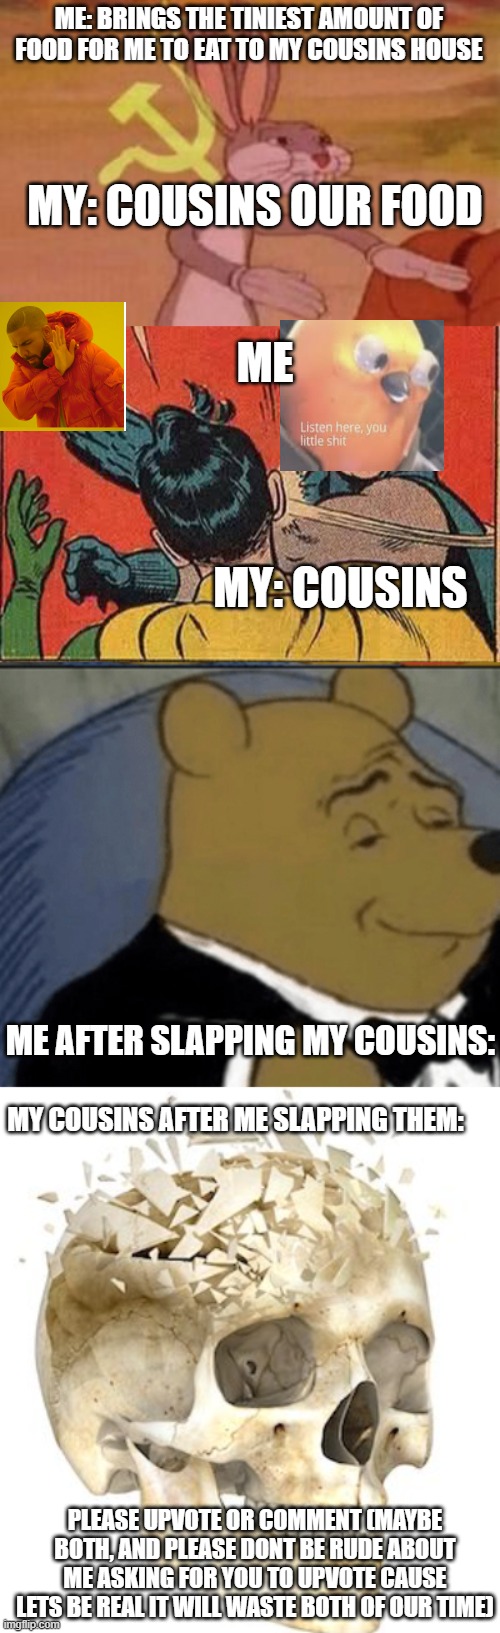 Crossover event | ME: BRINGS THE TINIEST AMOUNT OF FOOD FOR ME TO EAT TO MY COUSINS HOUSE; MY: COUSINS OUR FOOD; ME; MY: COUSINS; ME AFTER SLAPPING MY COUSINS:; MY COUSINS AFTER ME SLAPPING THEM:; PLEASE UPVOTE OR COMMENT (MAYBE BOTH, AND PLEASE DONT BE RUDE ABOUT ME ASKING FOR YOU TO UPVOTE CAUSE LETS BE REAL IT WILL WASTE BOTH OF OUR TIME) | image tagged in memes,batman slapping robin,tuxedo winnie the pooh,our,skull,drake hotline bling | made w/ Imgflip meme maker